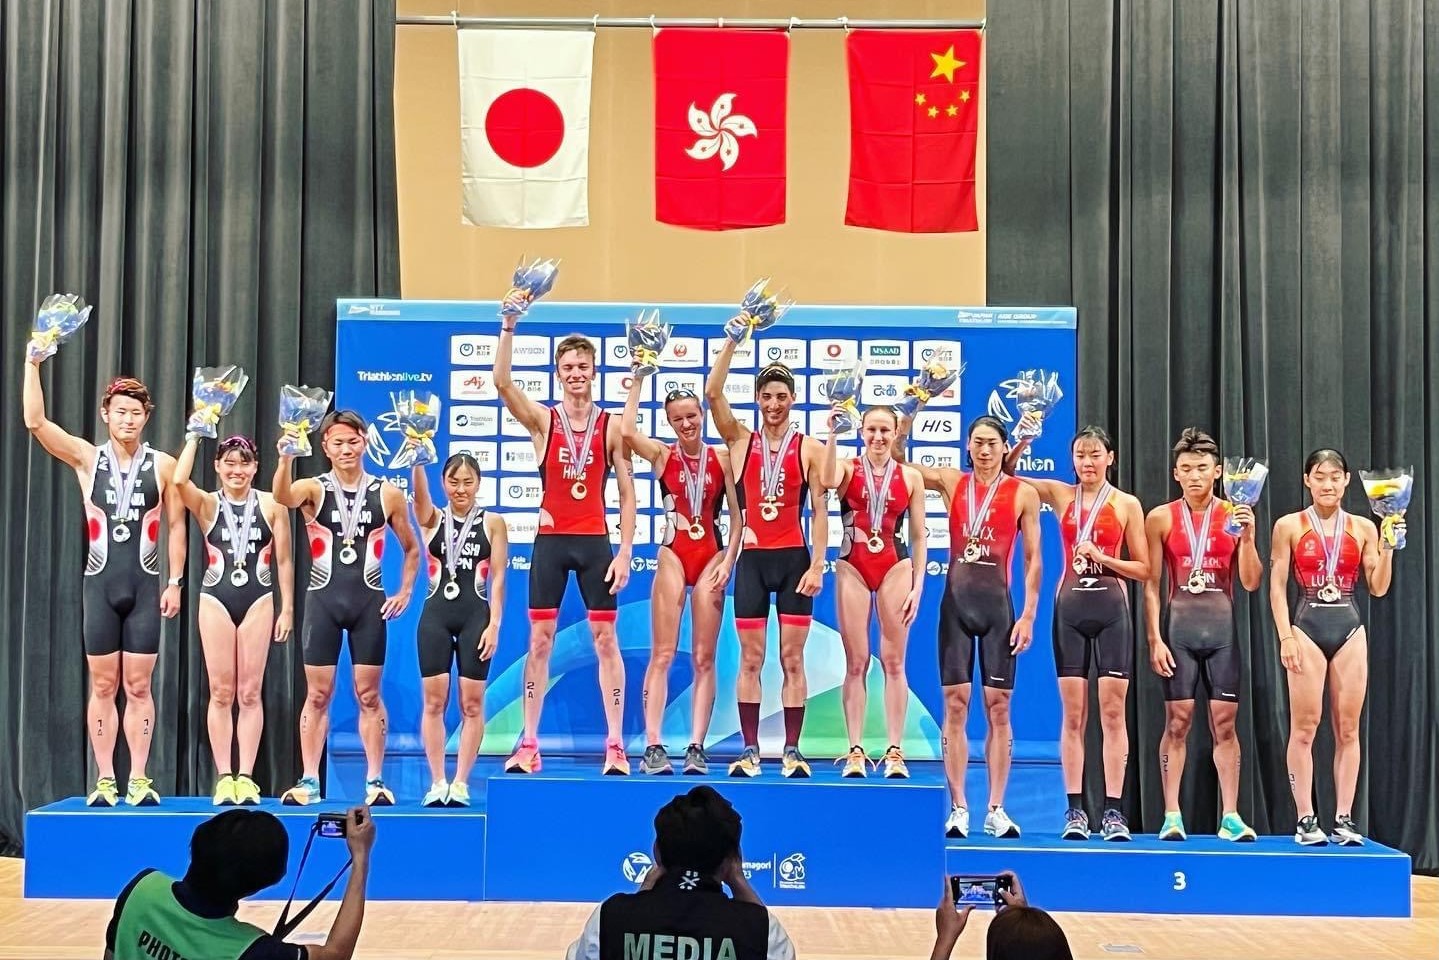 After winning team gold at the Asian Triathlon U23 and Junior Championships in Japan, Jason (sixth from the right) and his teammates stand atop the podium to celebrate their accomplishment. (Photo: Delong Hung)